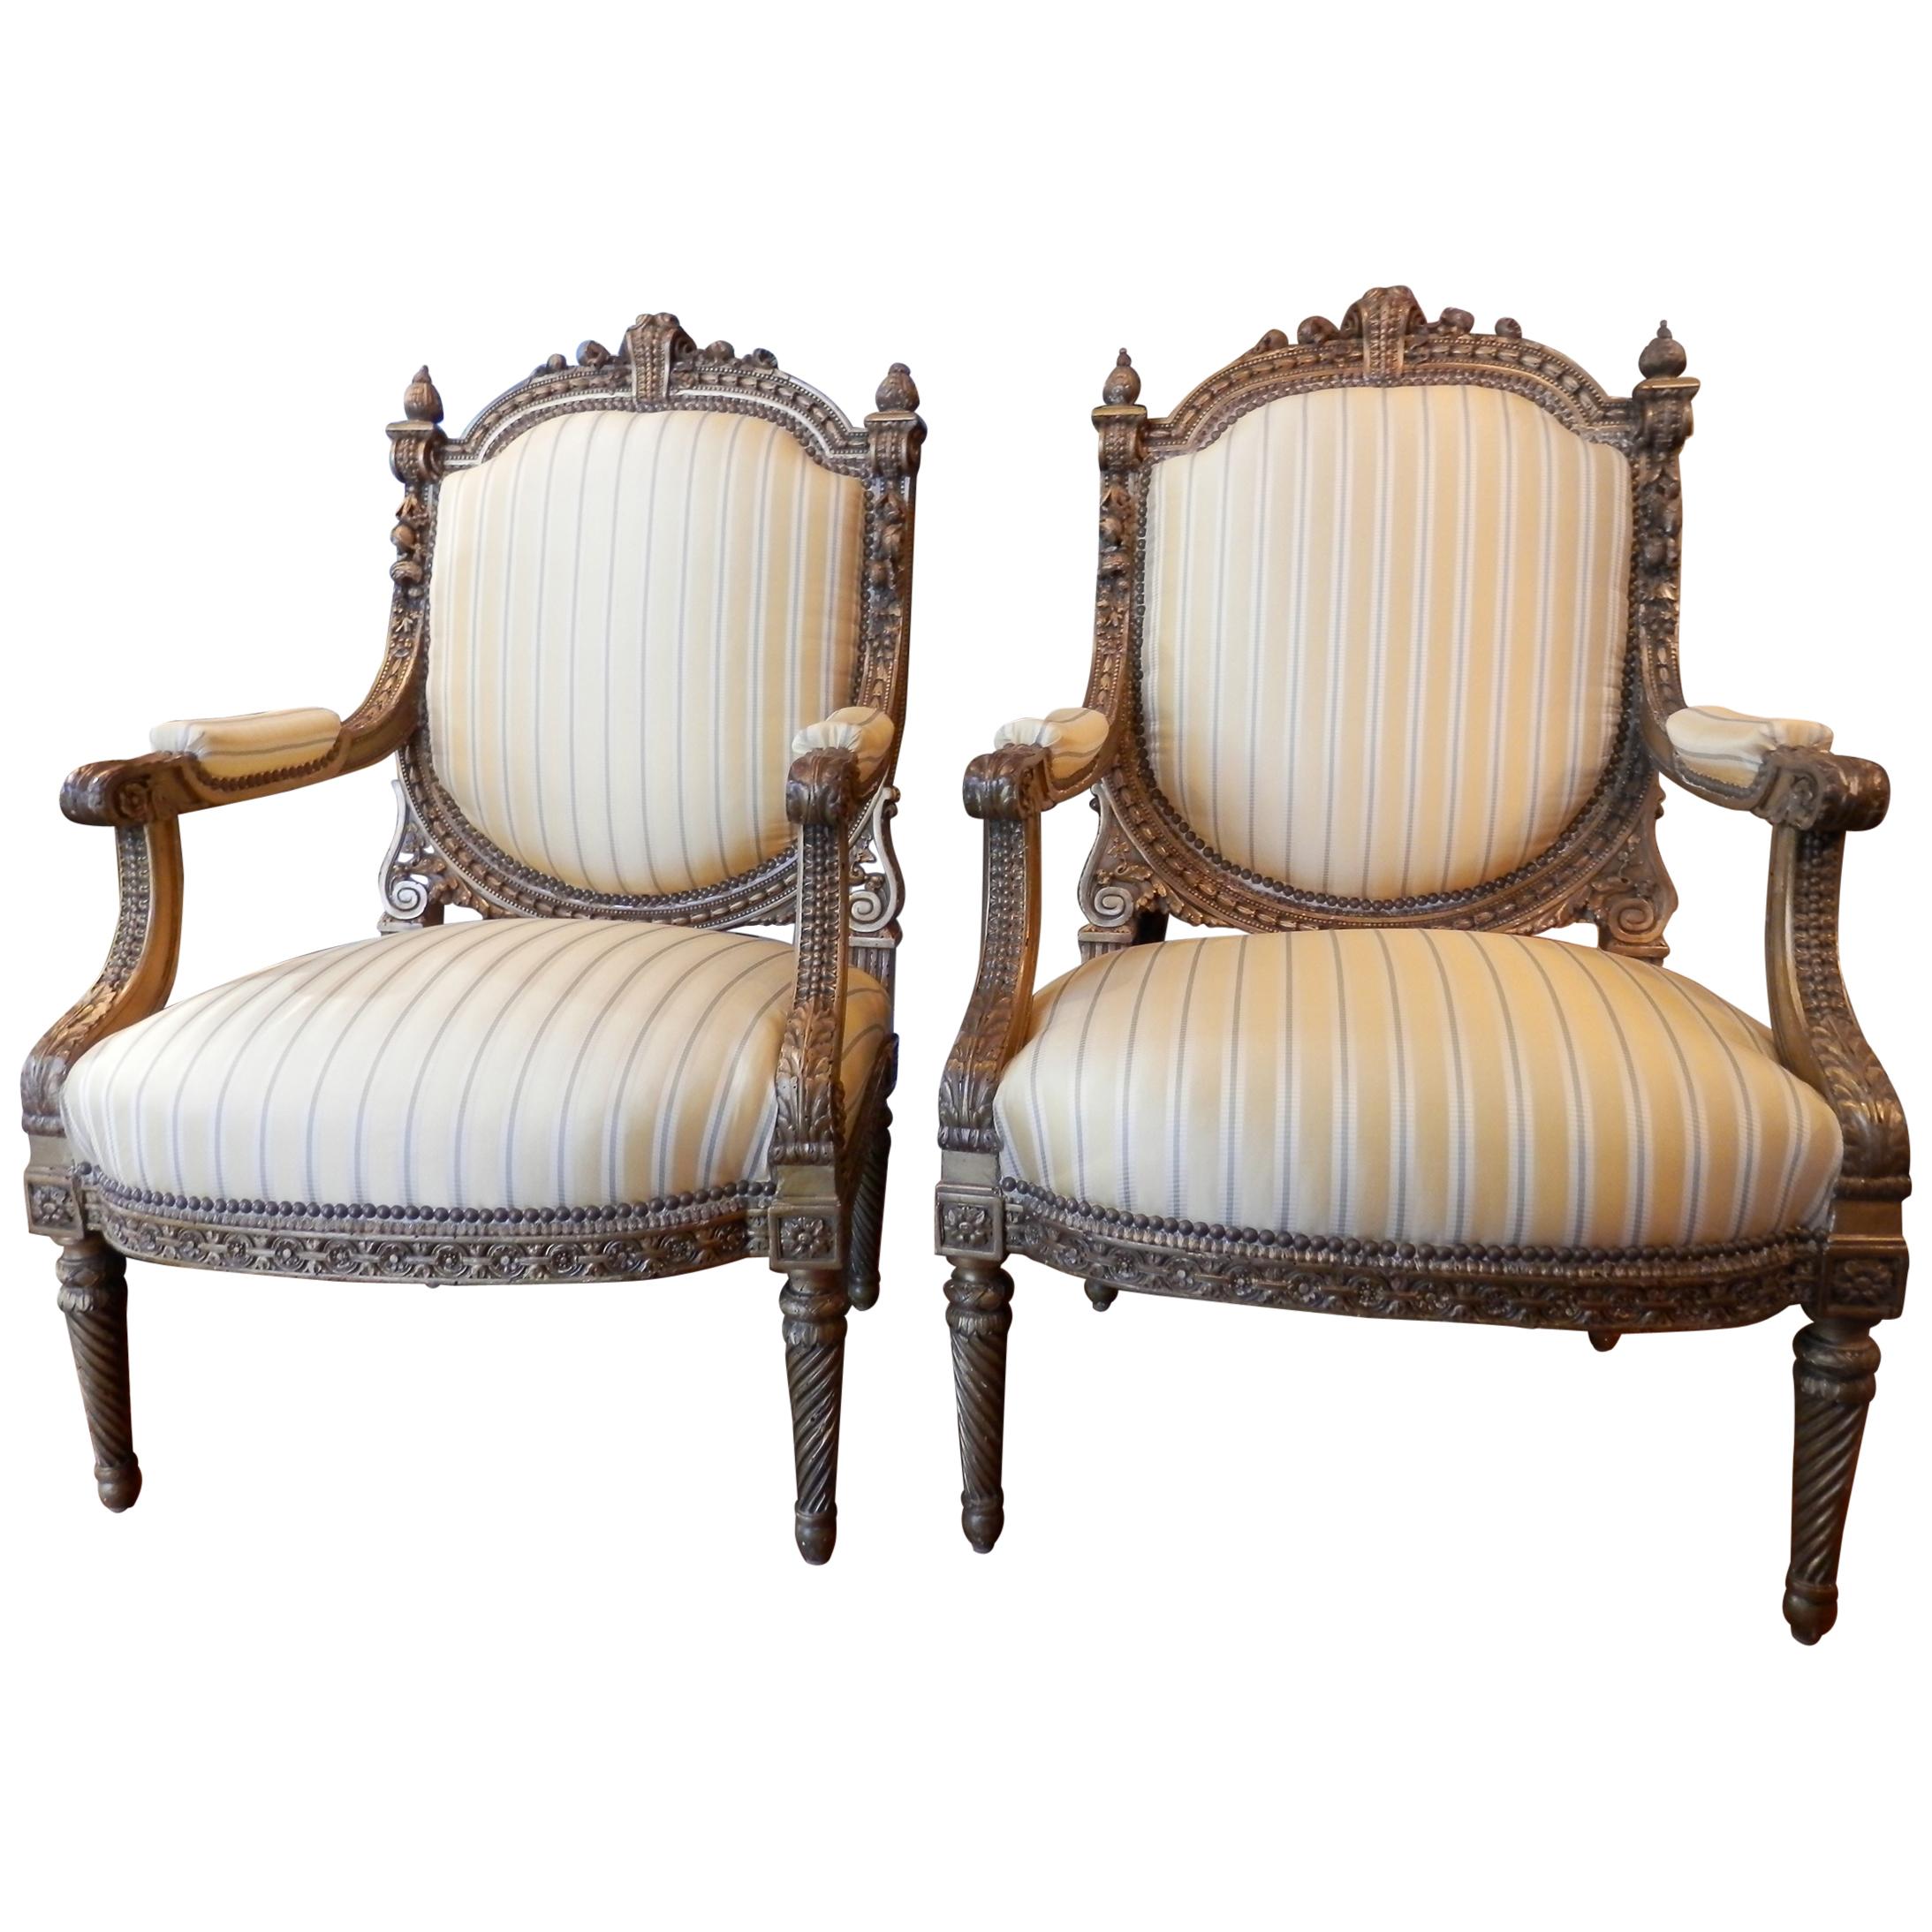 Pair of Early 20th Century French Louis XVI Gilt Large Open Armchairs